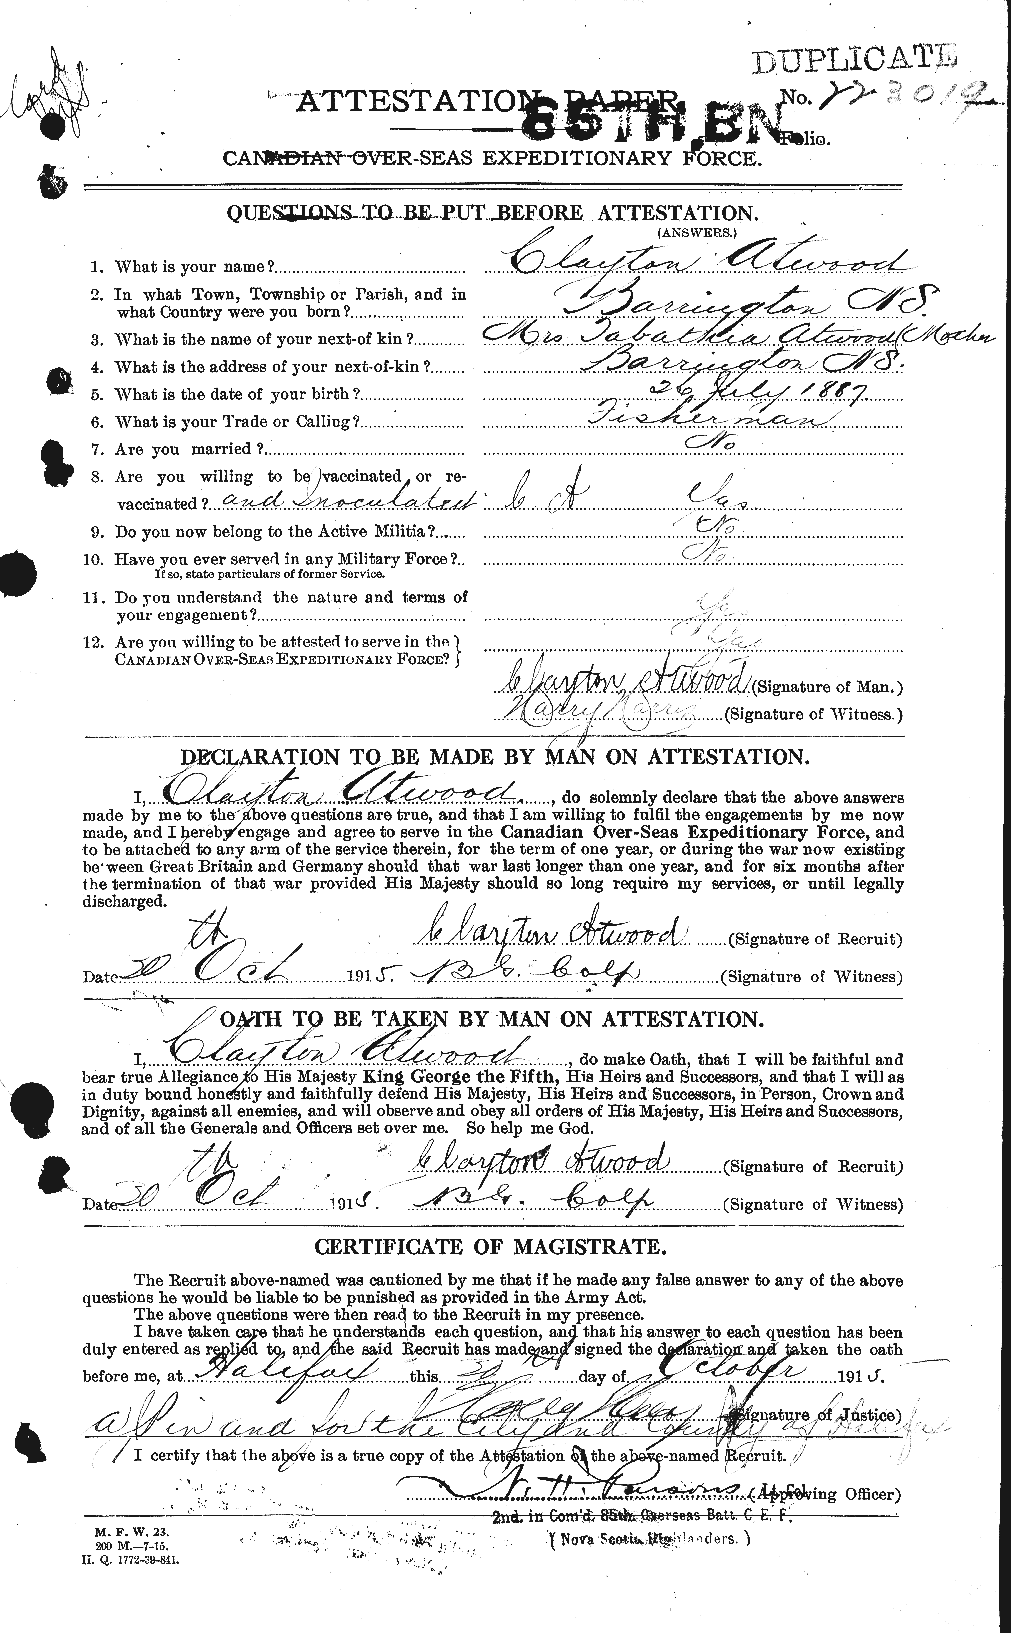 Personnel Records of the First World War - CEF 223960a